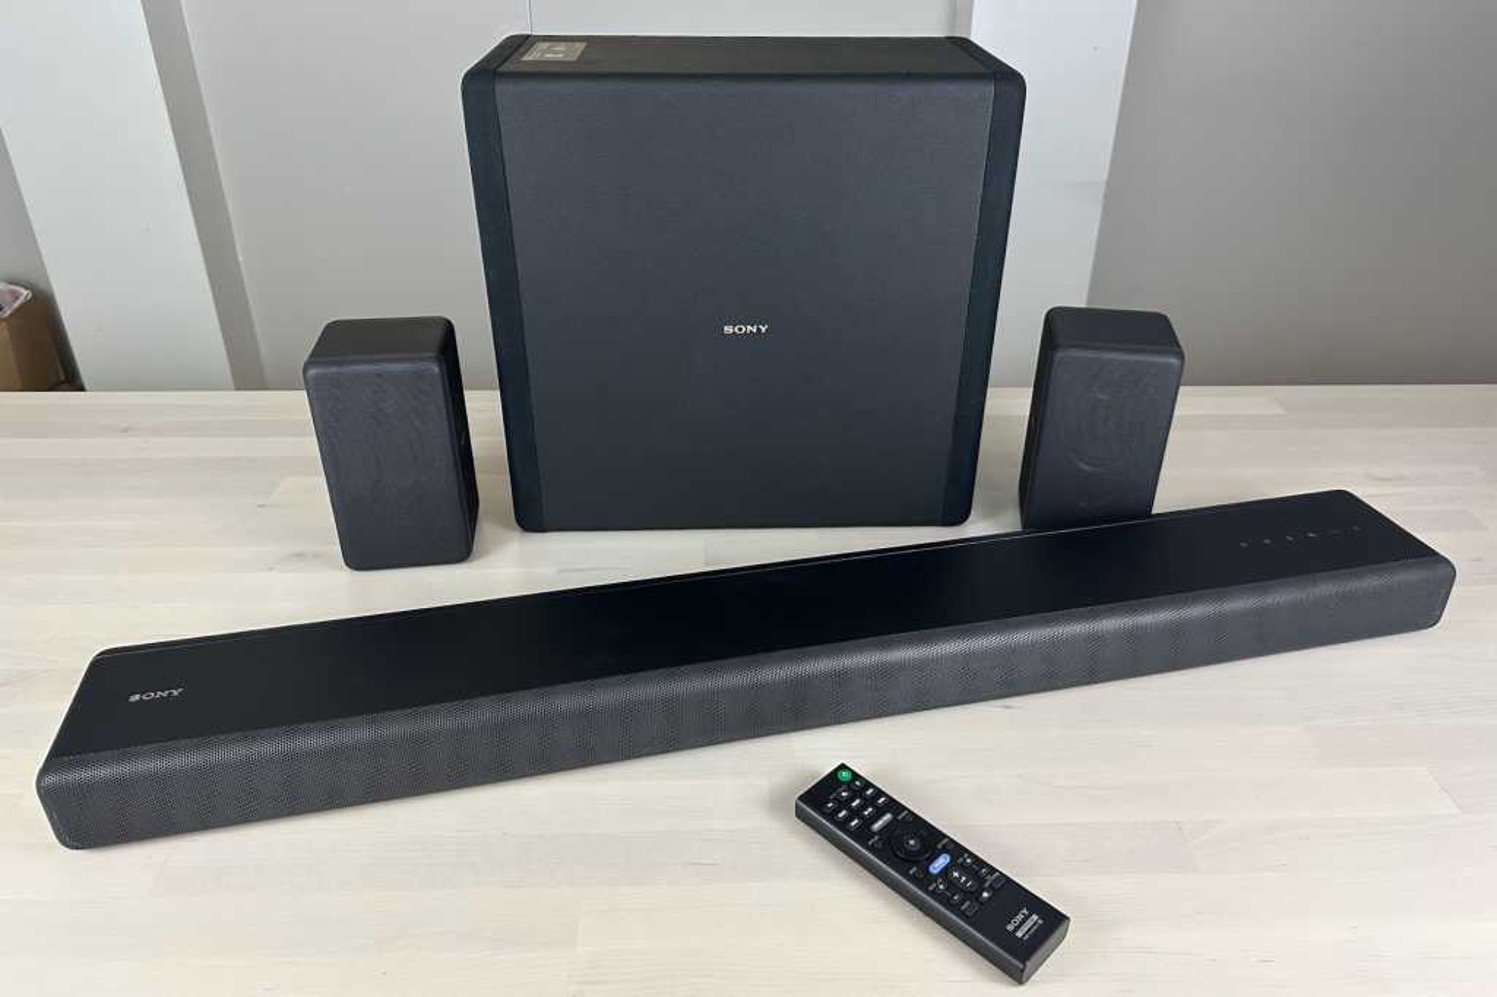 How To Pair Sony Soundbar To Subwoofer